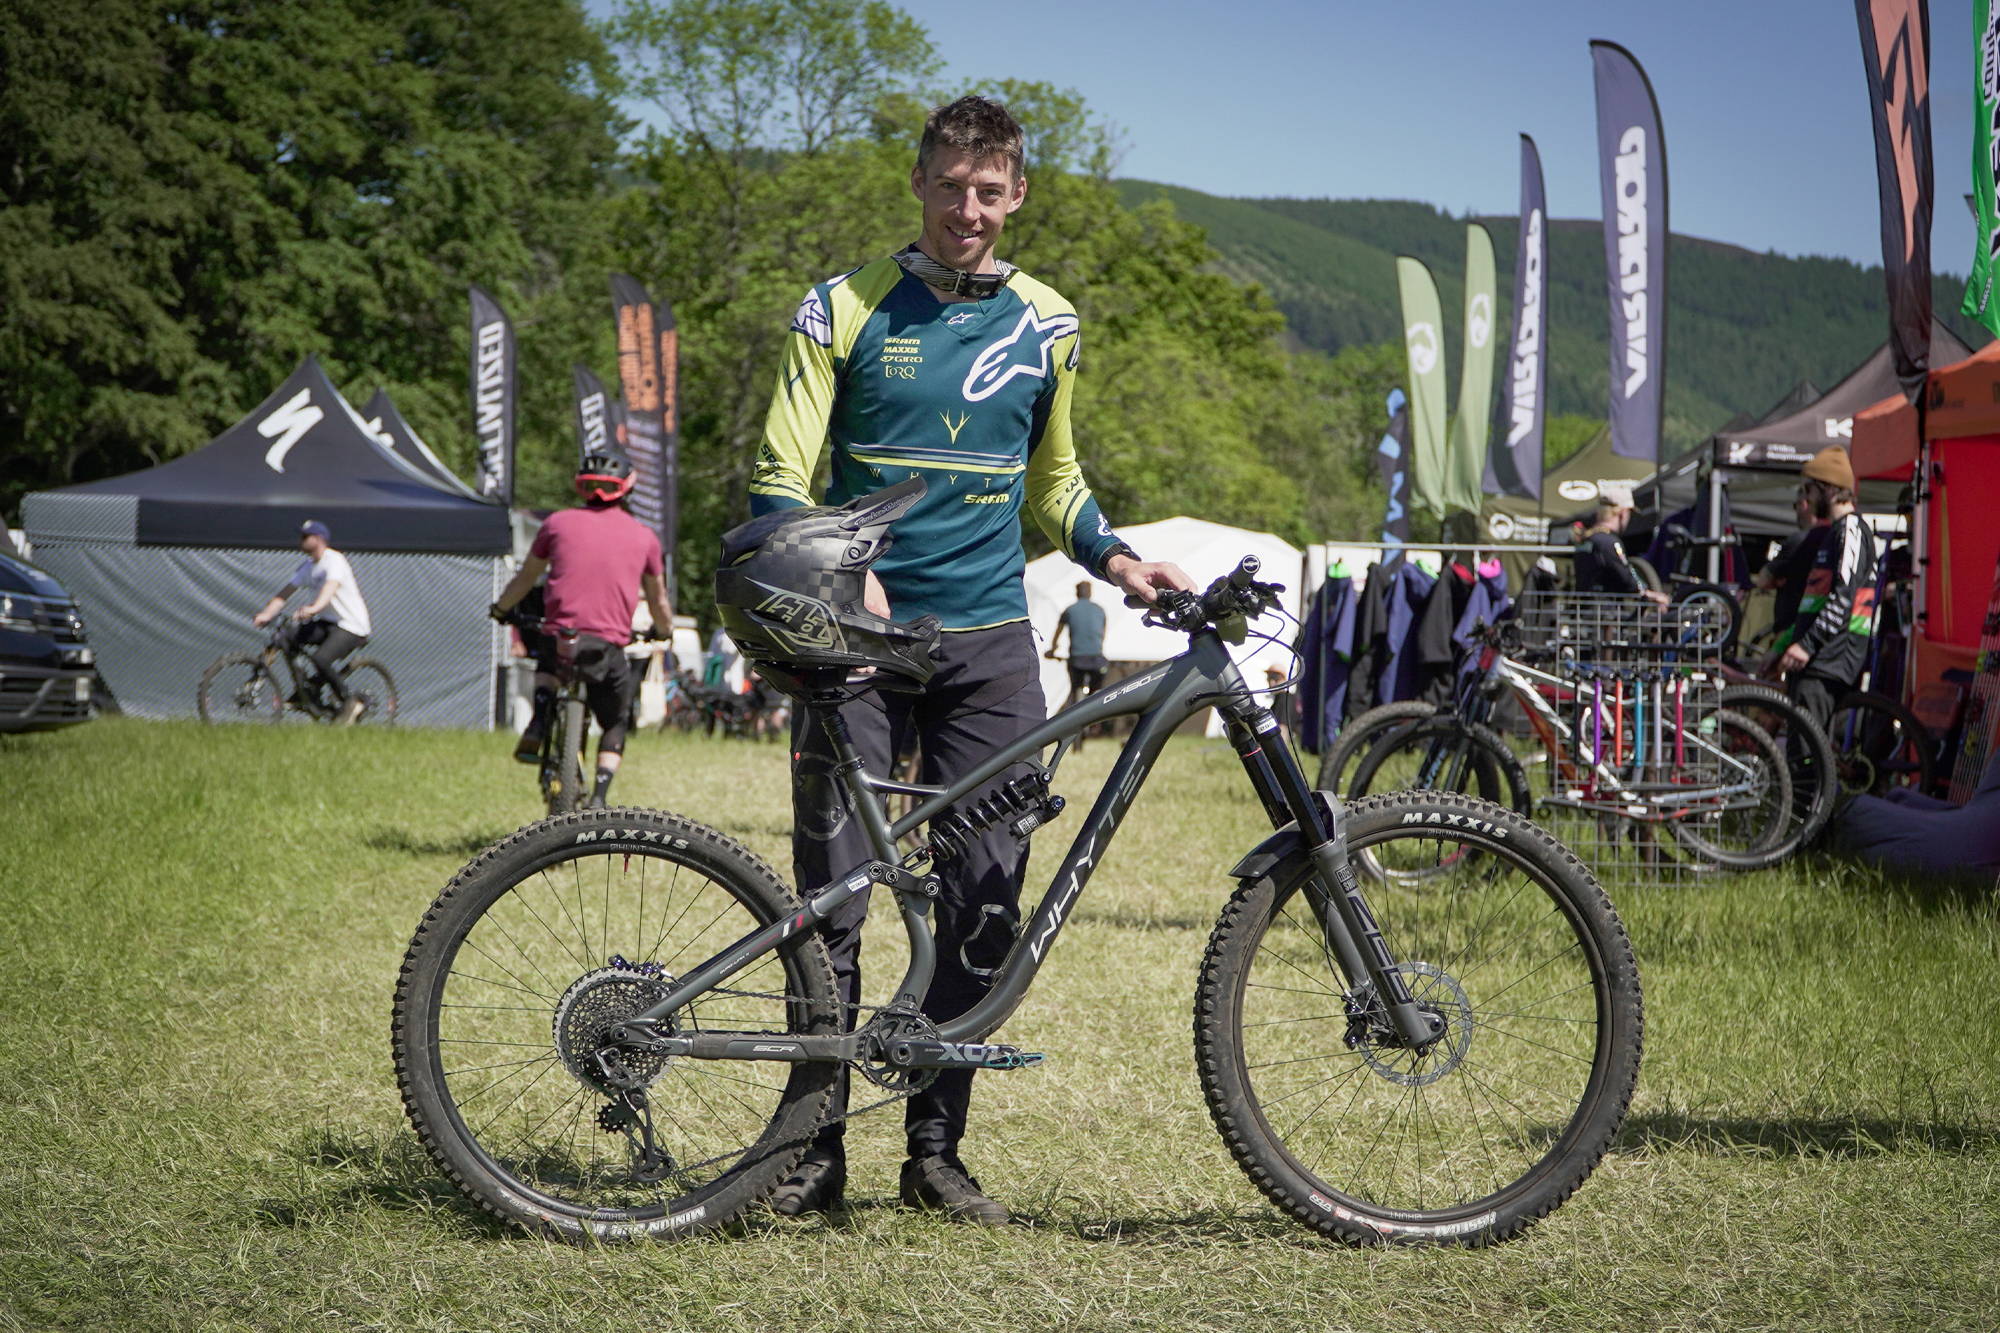 Team Whyte rider Martyn with his MTB